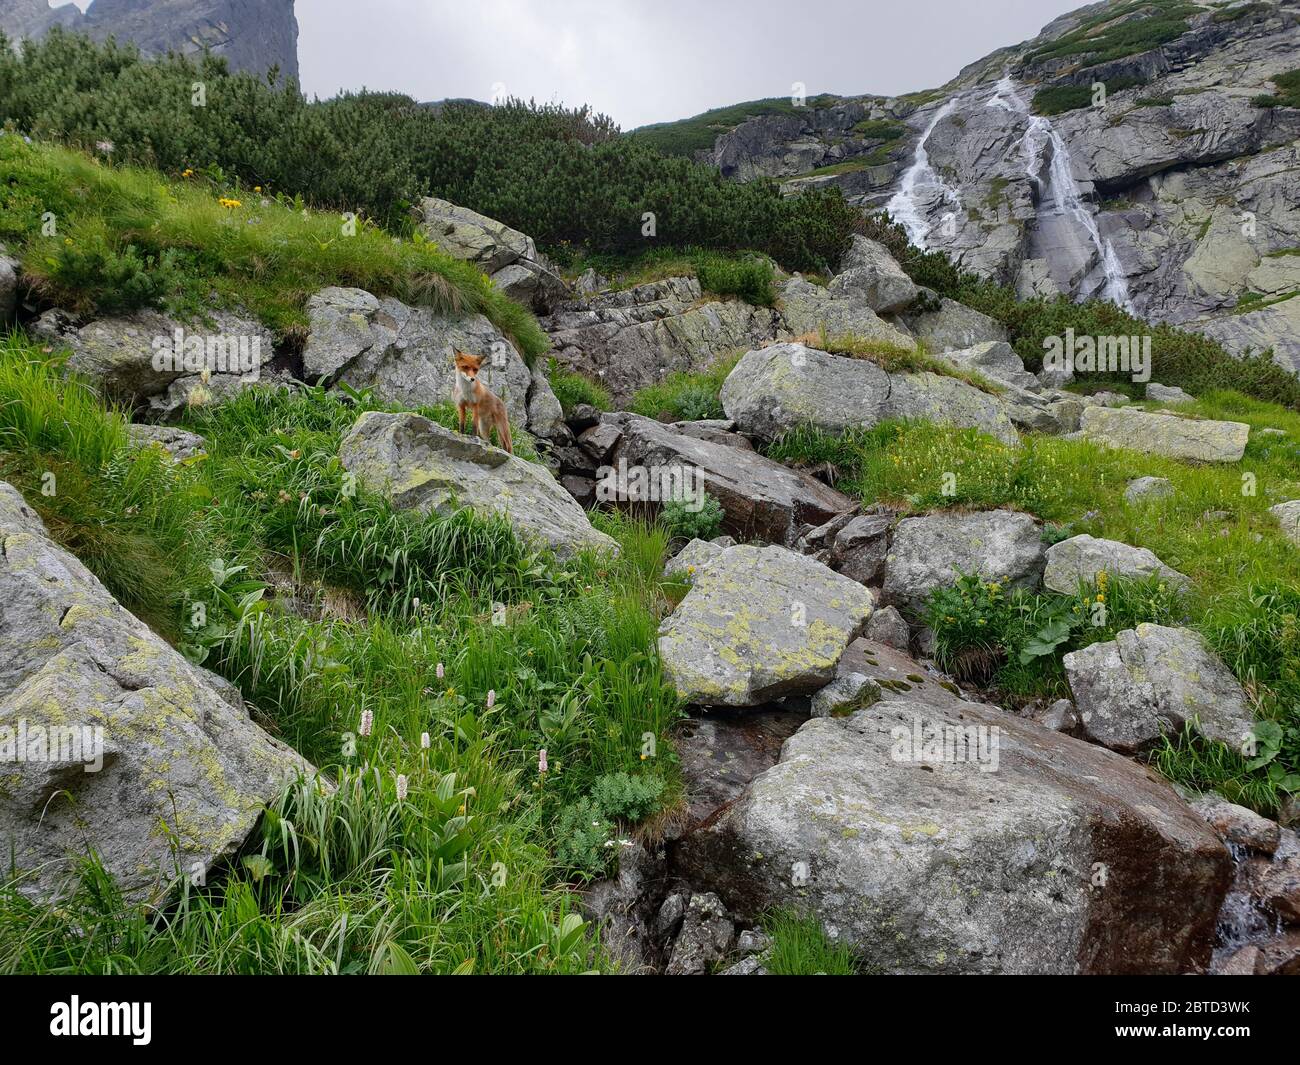 Stone wall in the mountains Stock Photo